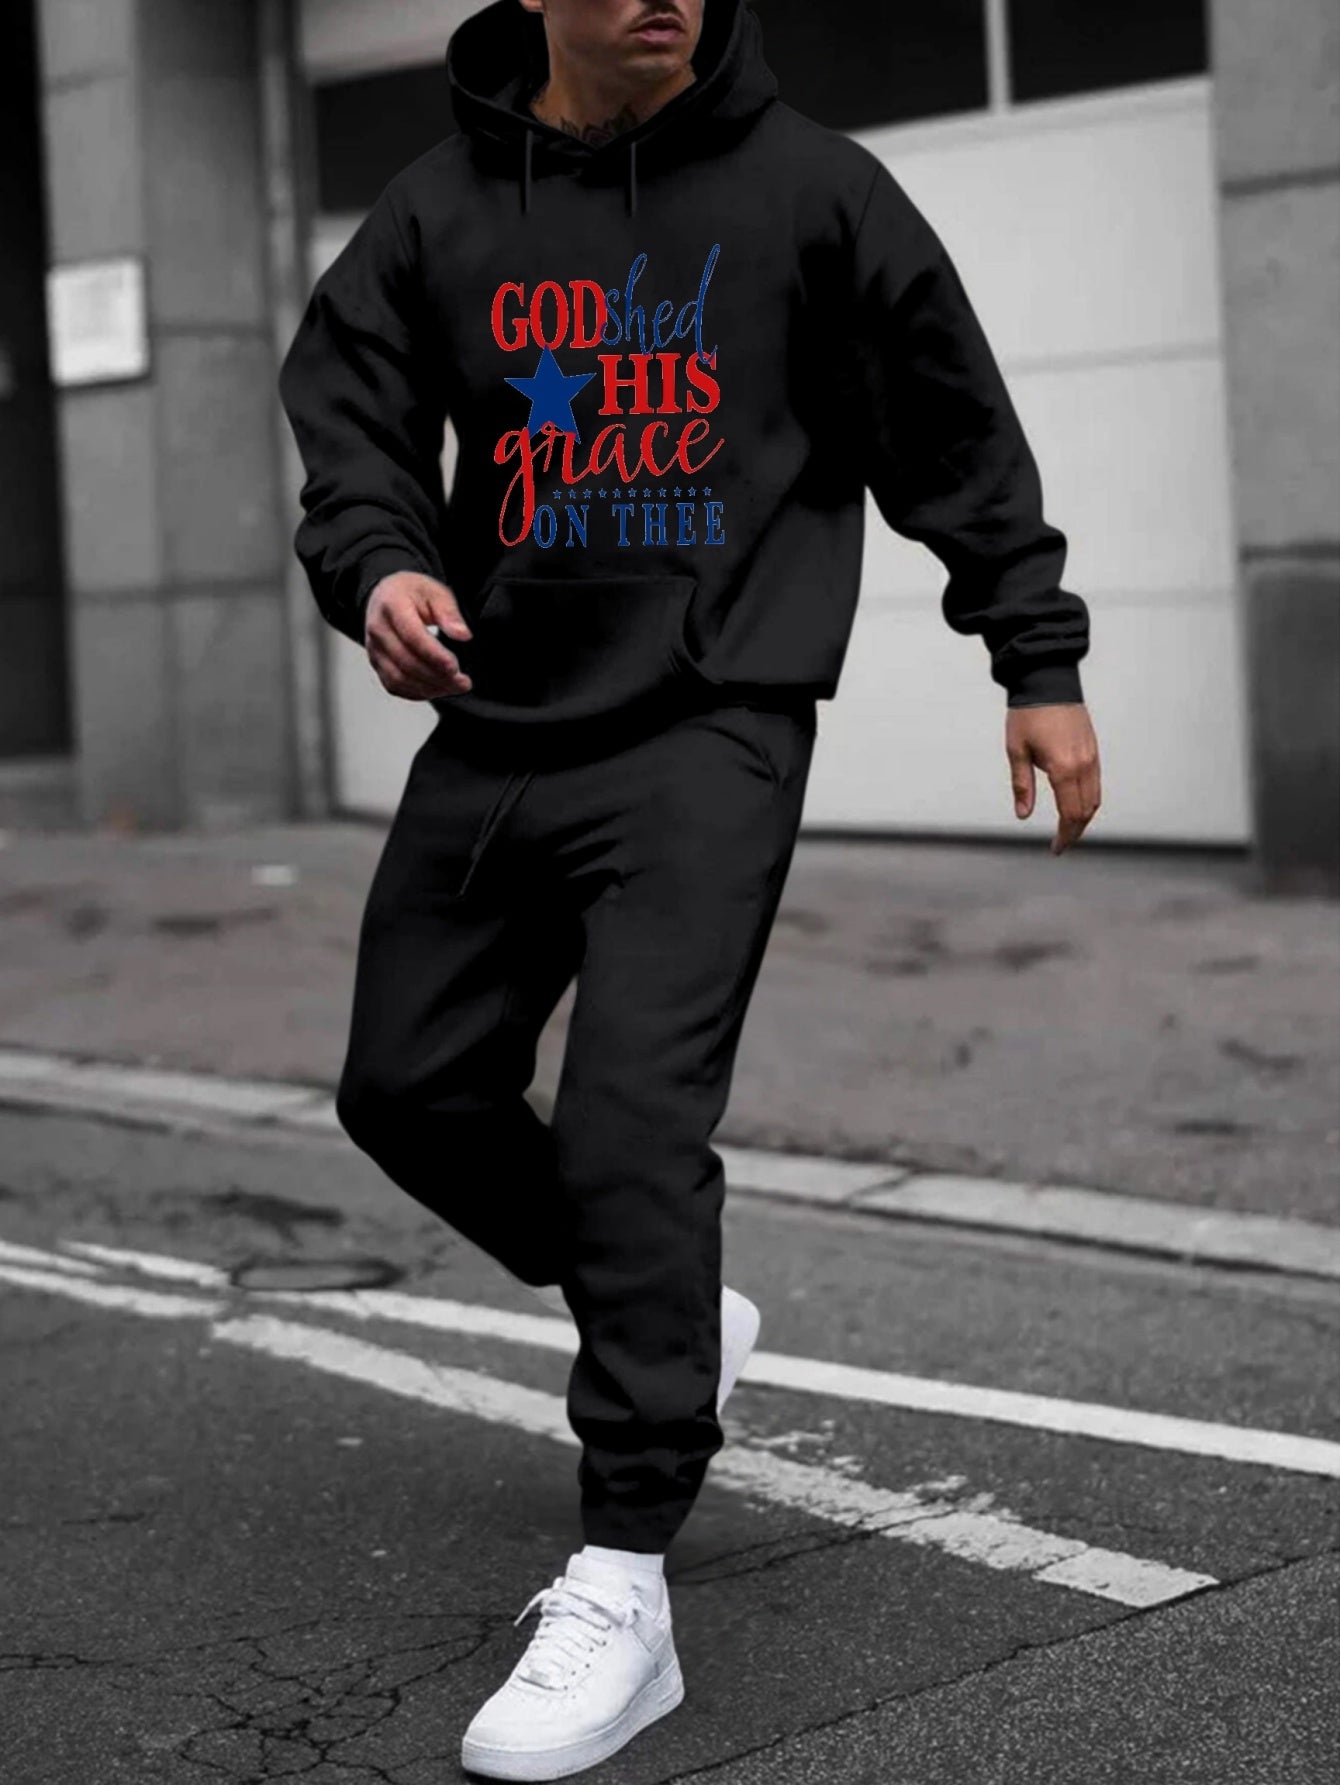 God Shed His Grace On Thee Men's Christian Casual Outfit claimedbygoddesigns